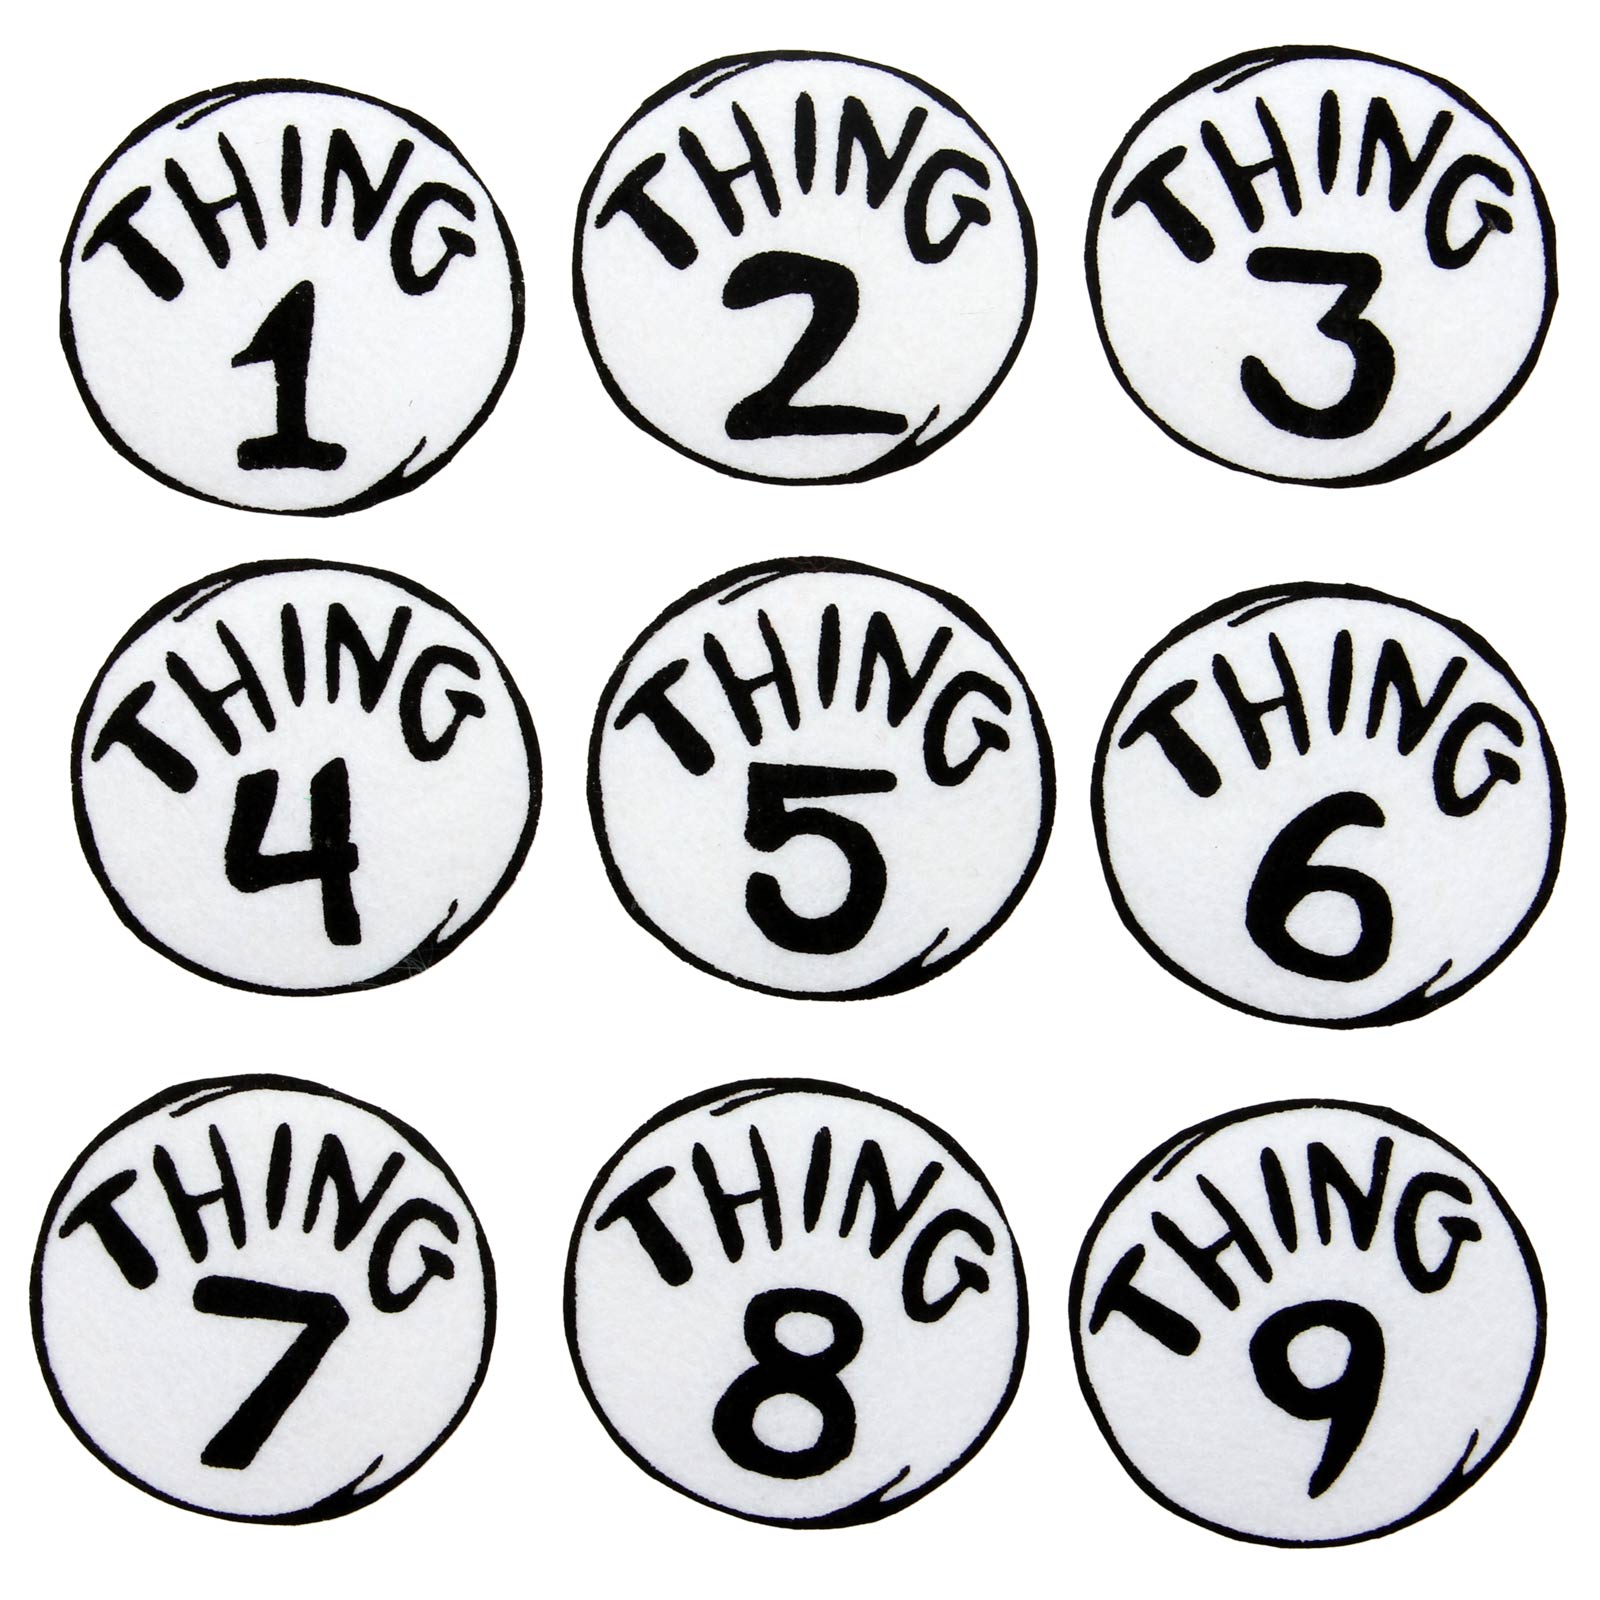 Thing 1 & 2 Cat in the Hat Things 1-9 Patches Costume Accessory DIY ...